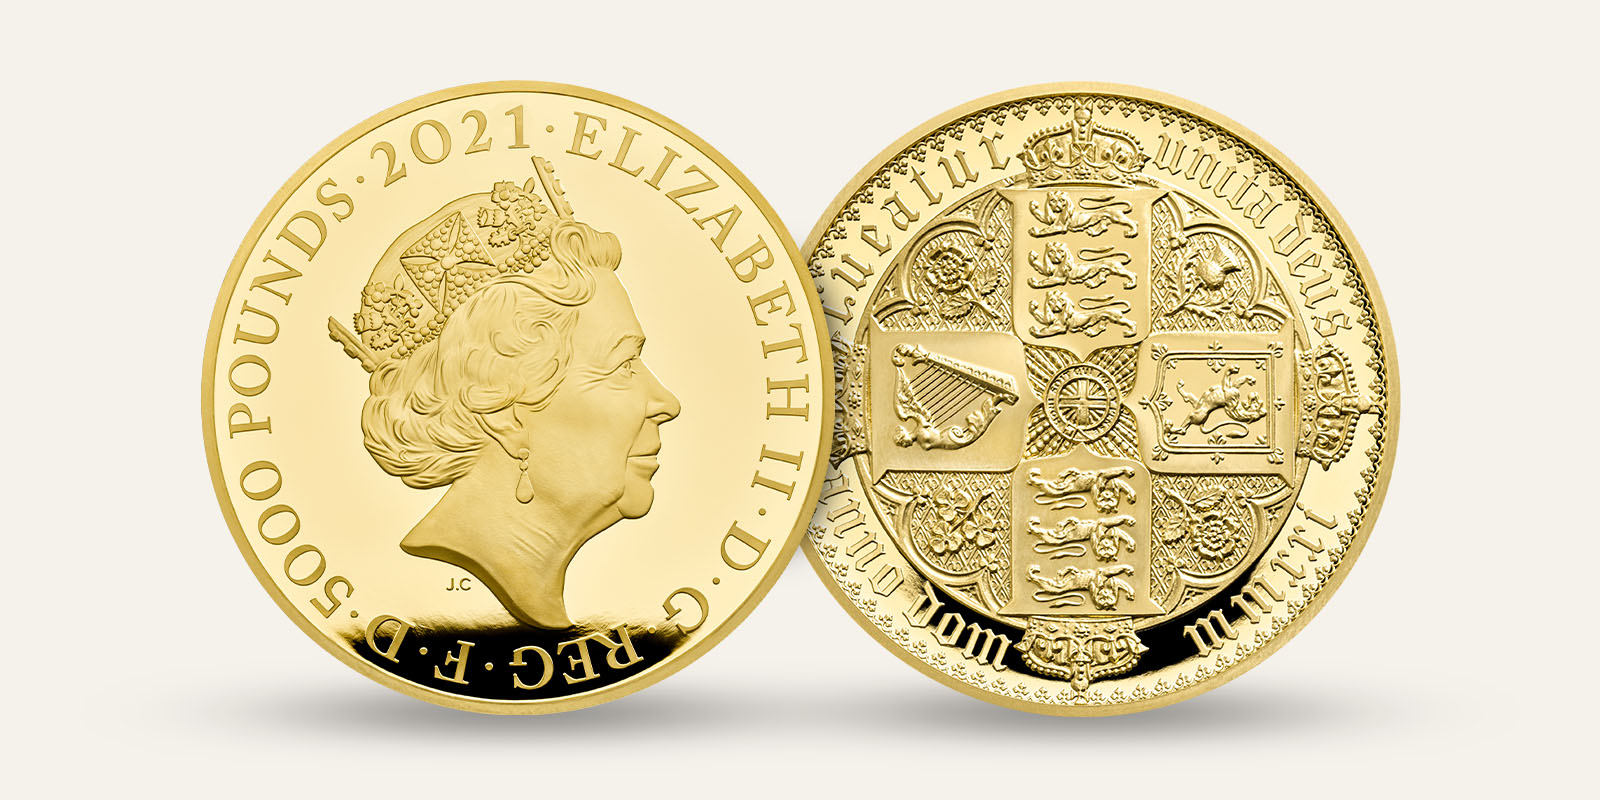 3-Gothic Crown Quartered Arms 2021 UK 5kg Gold Proof Coin_.jpg